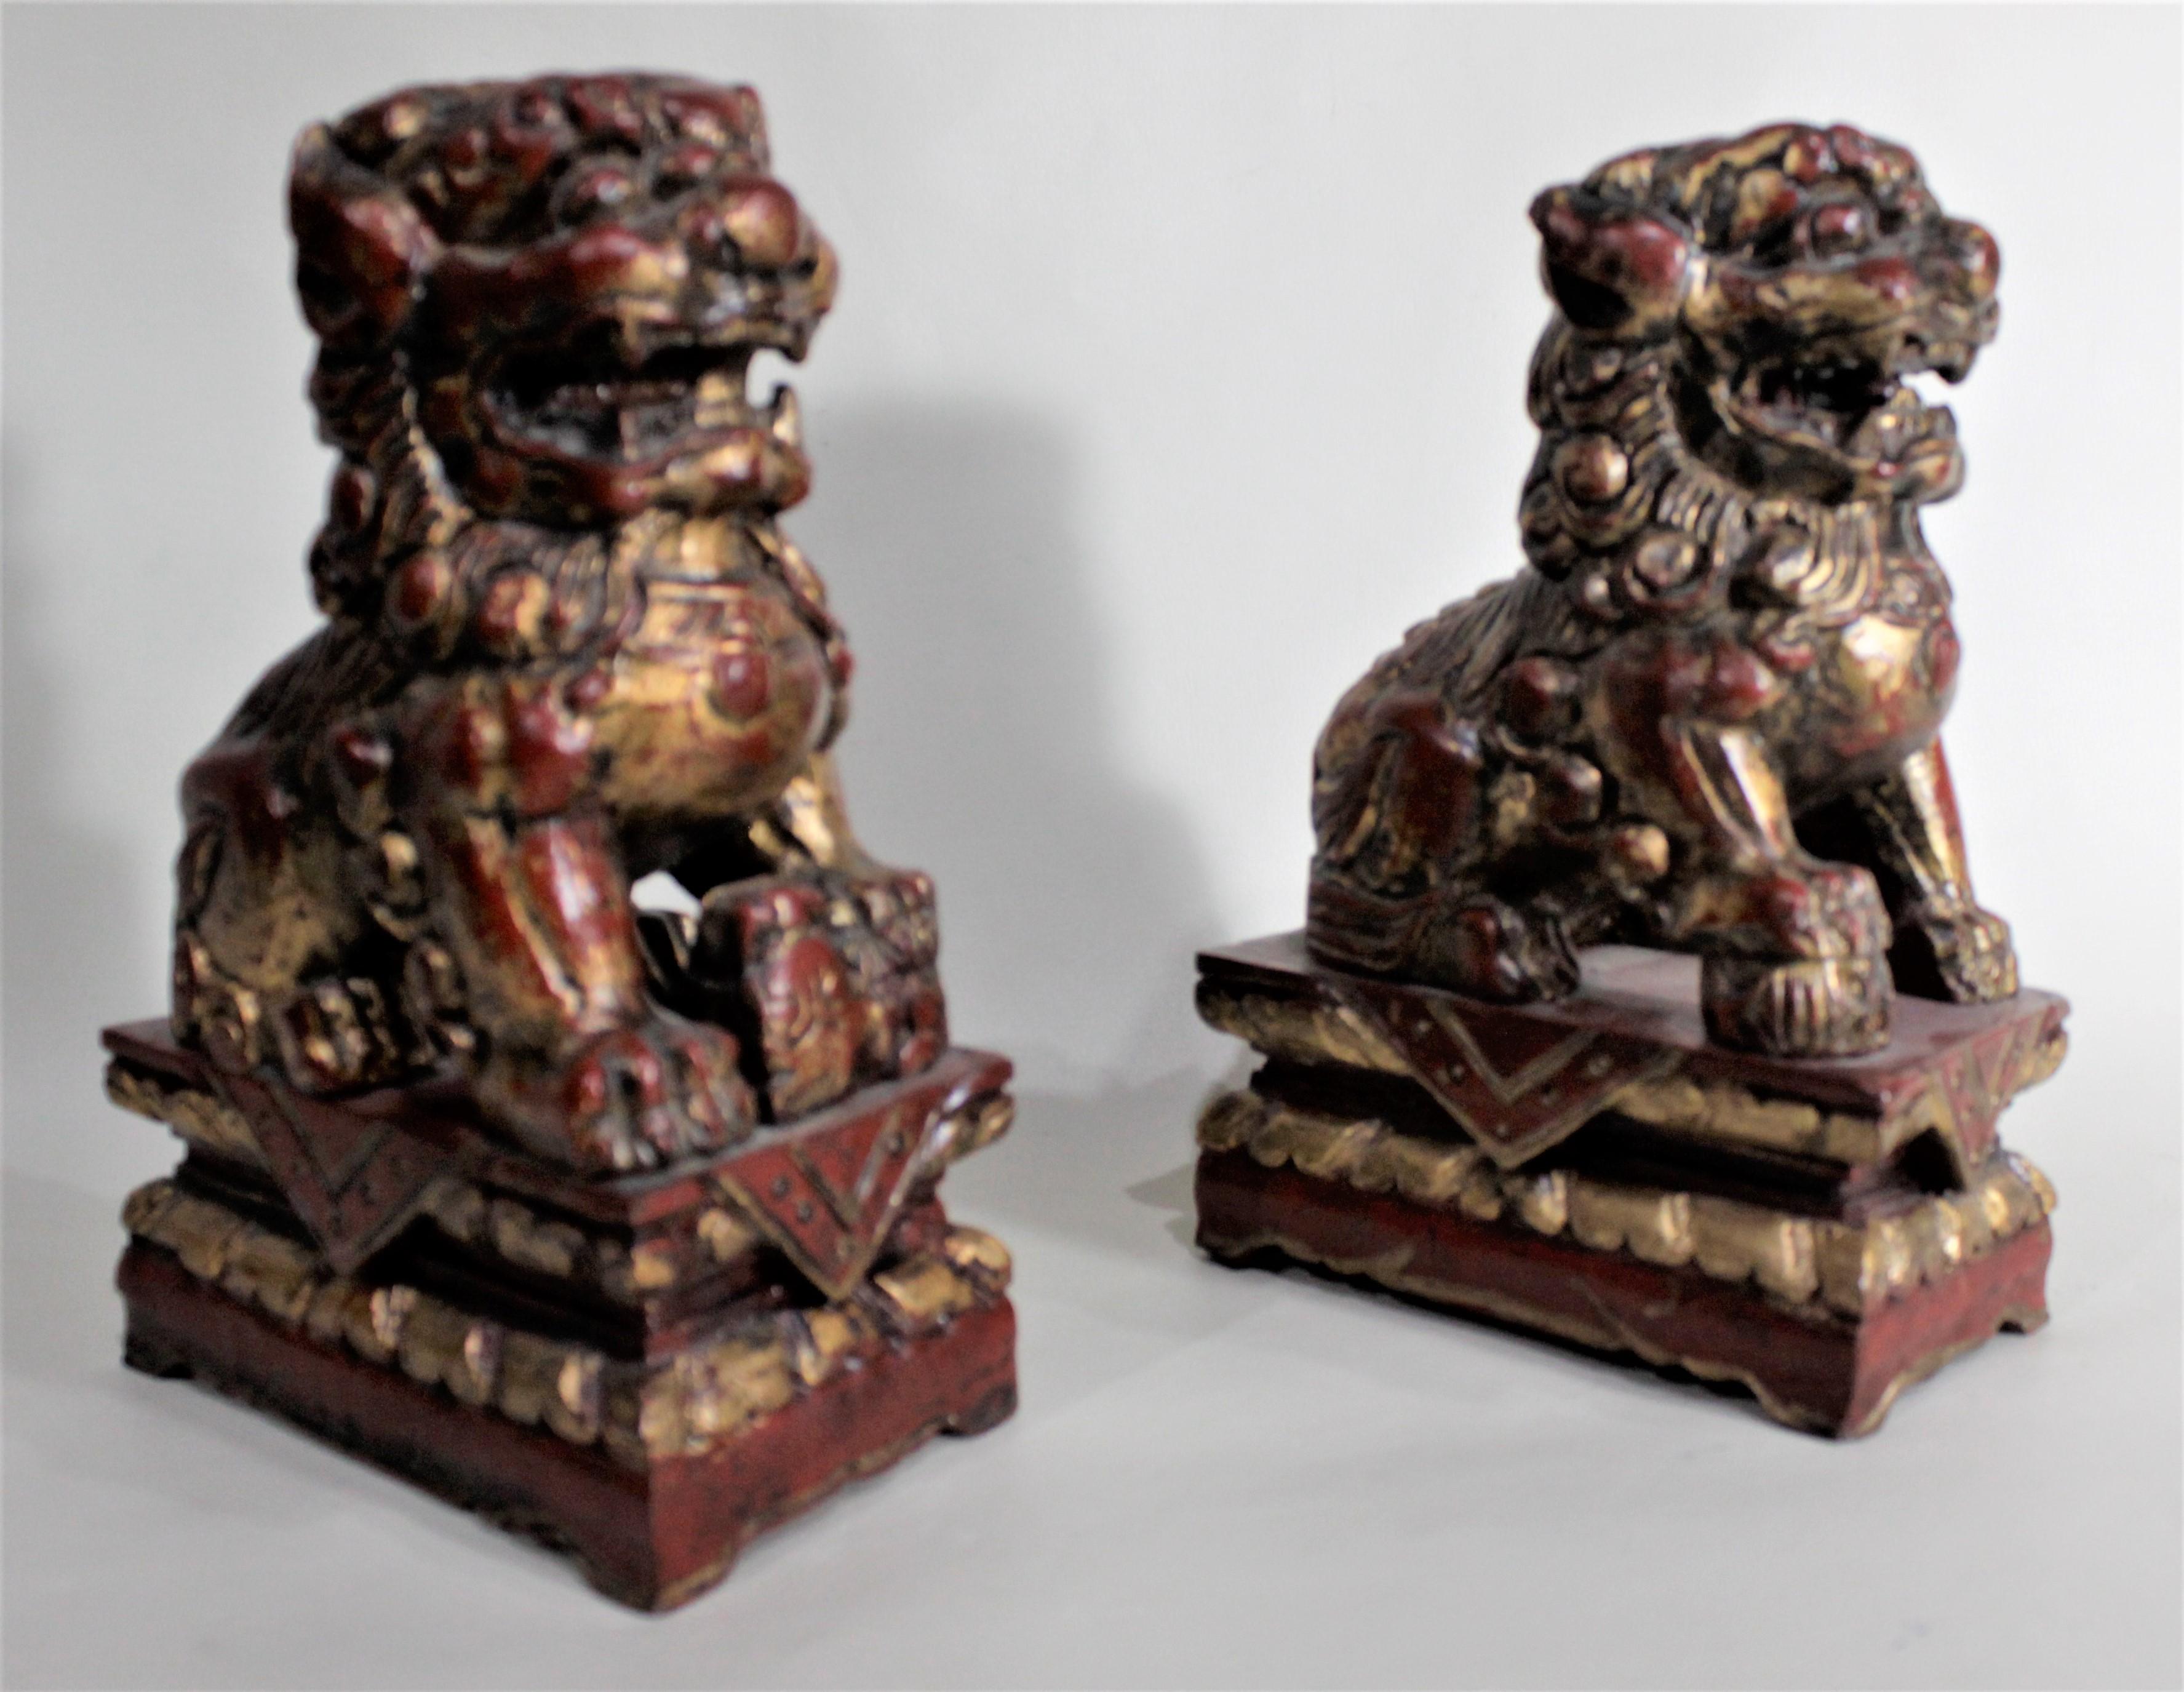 This pair of intricately hand carved and hand painted Foo dogs are believed to have made in the mid-20th century in the Imperial style. The dogs are composed of a softwood which have been hand carved in considerable detail and painted in a deep red